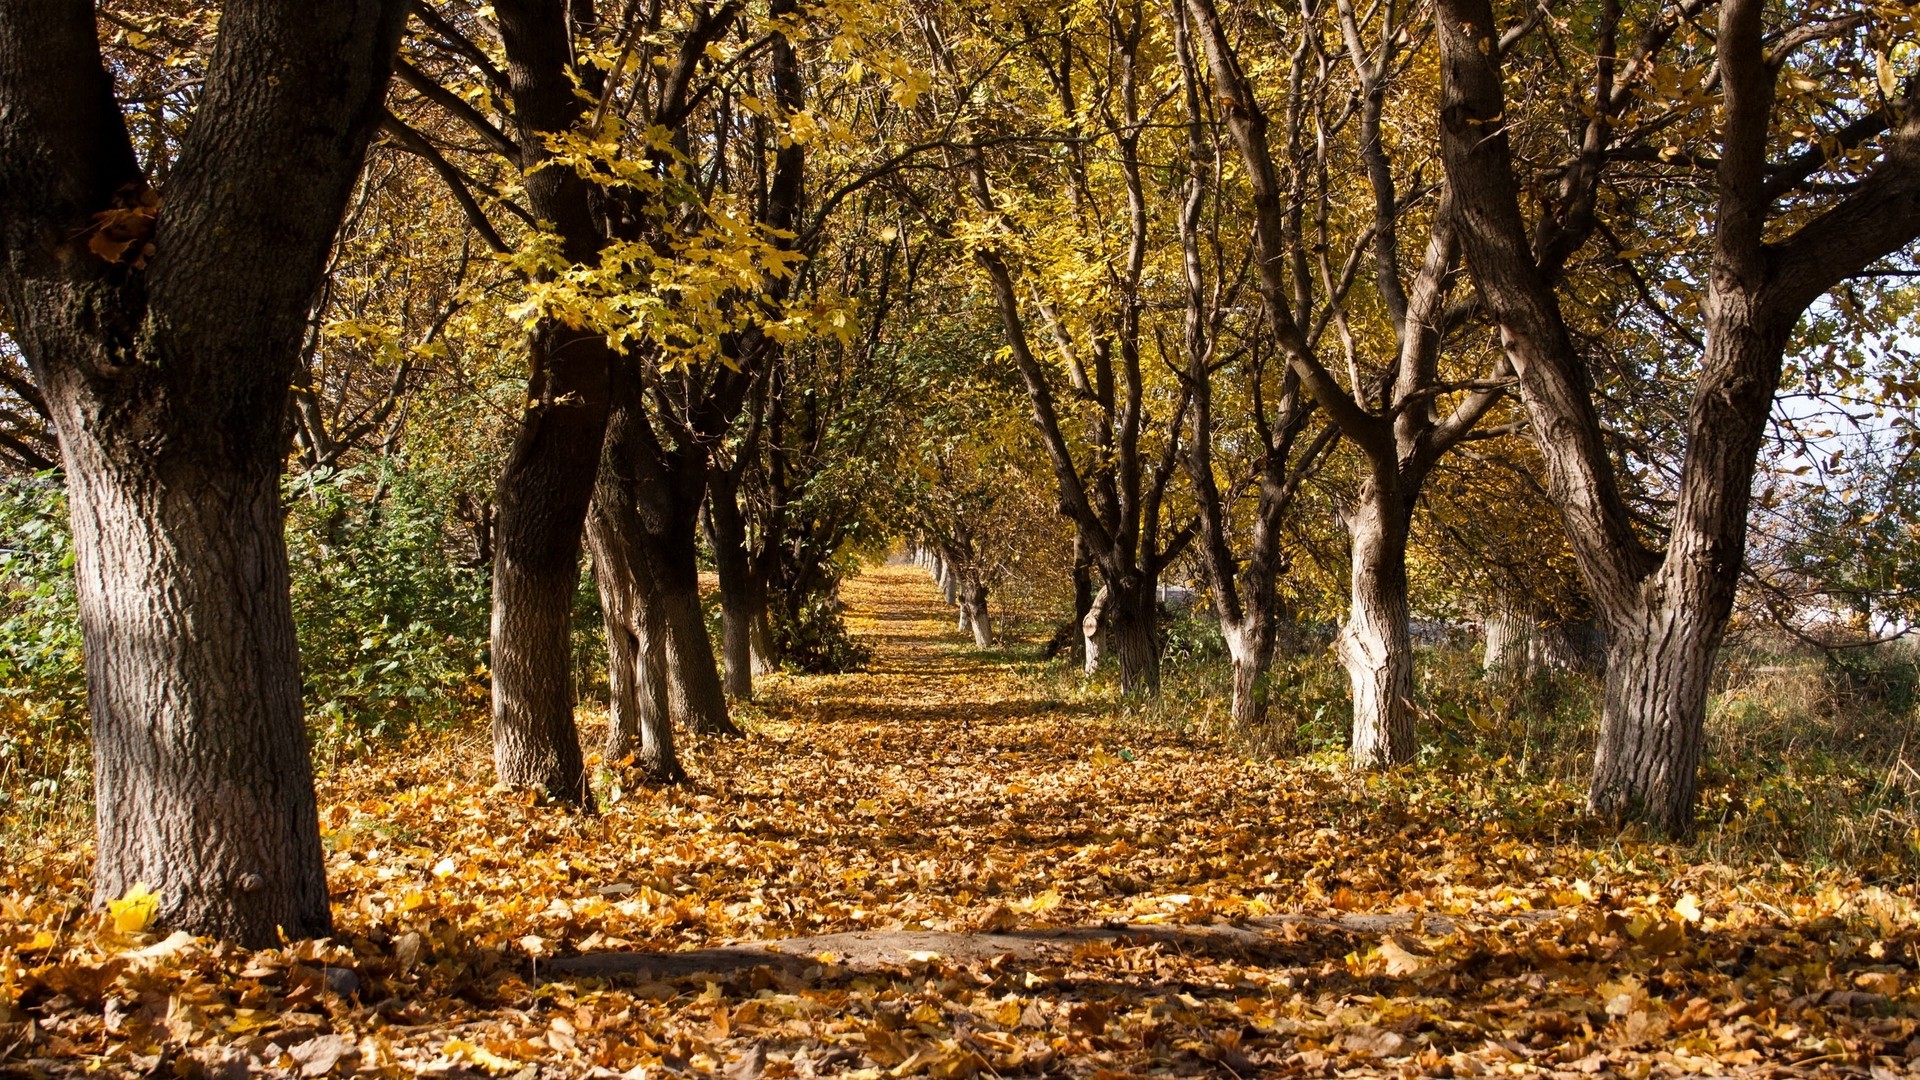 1920x1080 wallpapers: autumn, trees, leaf fall, October, wilting, ranks, trail (image)